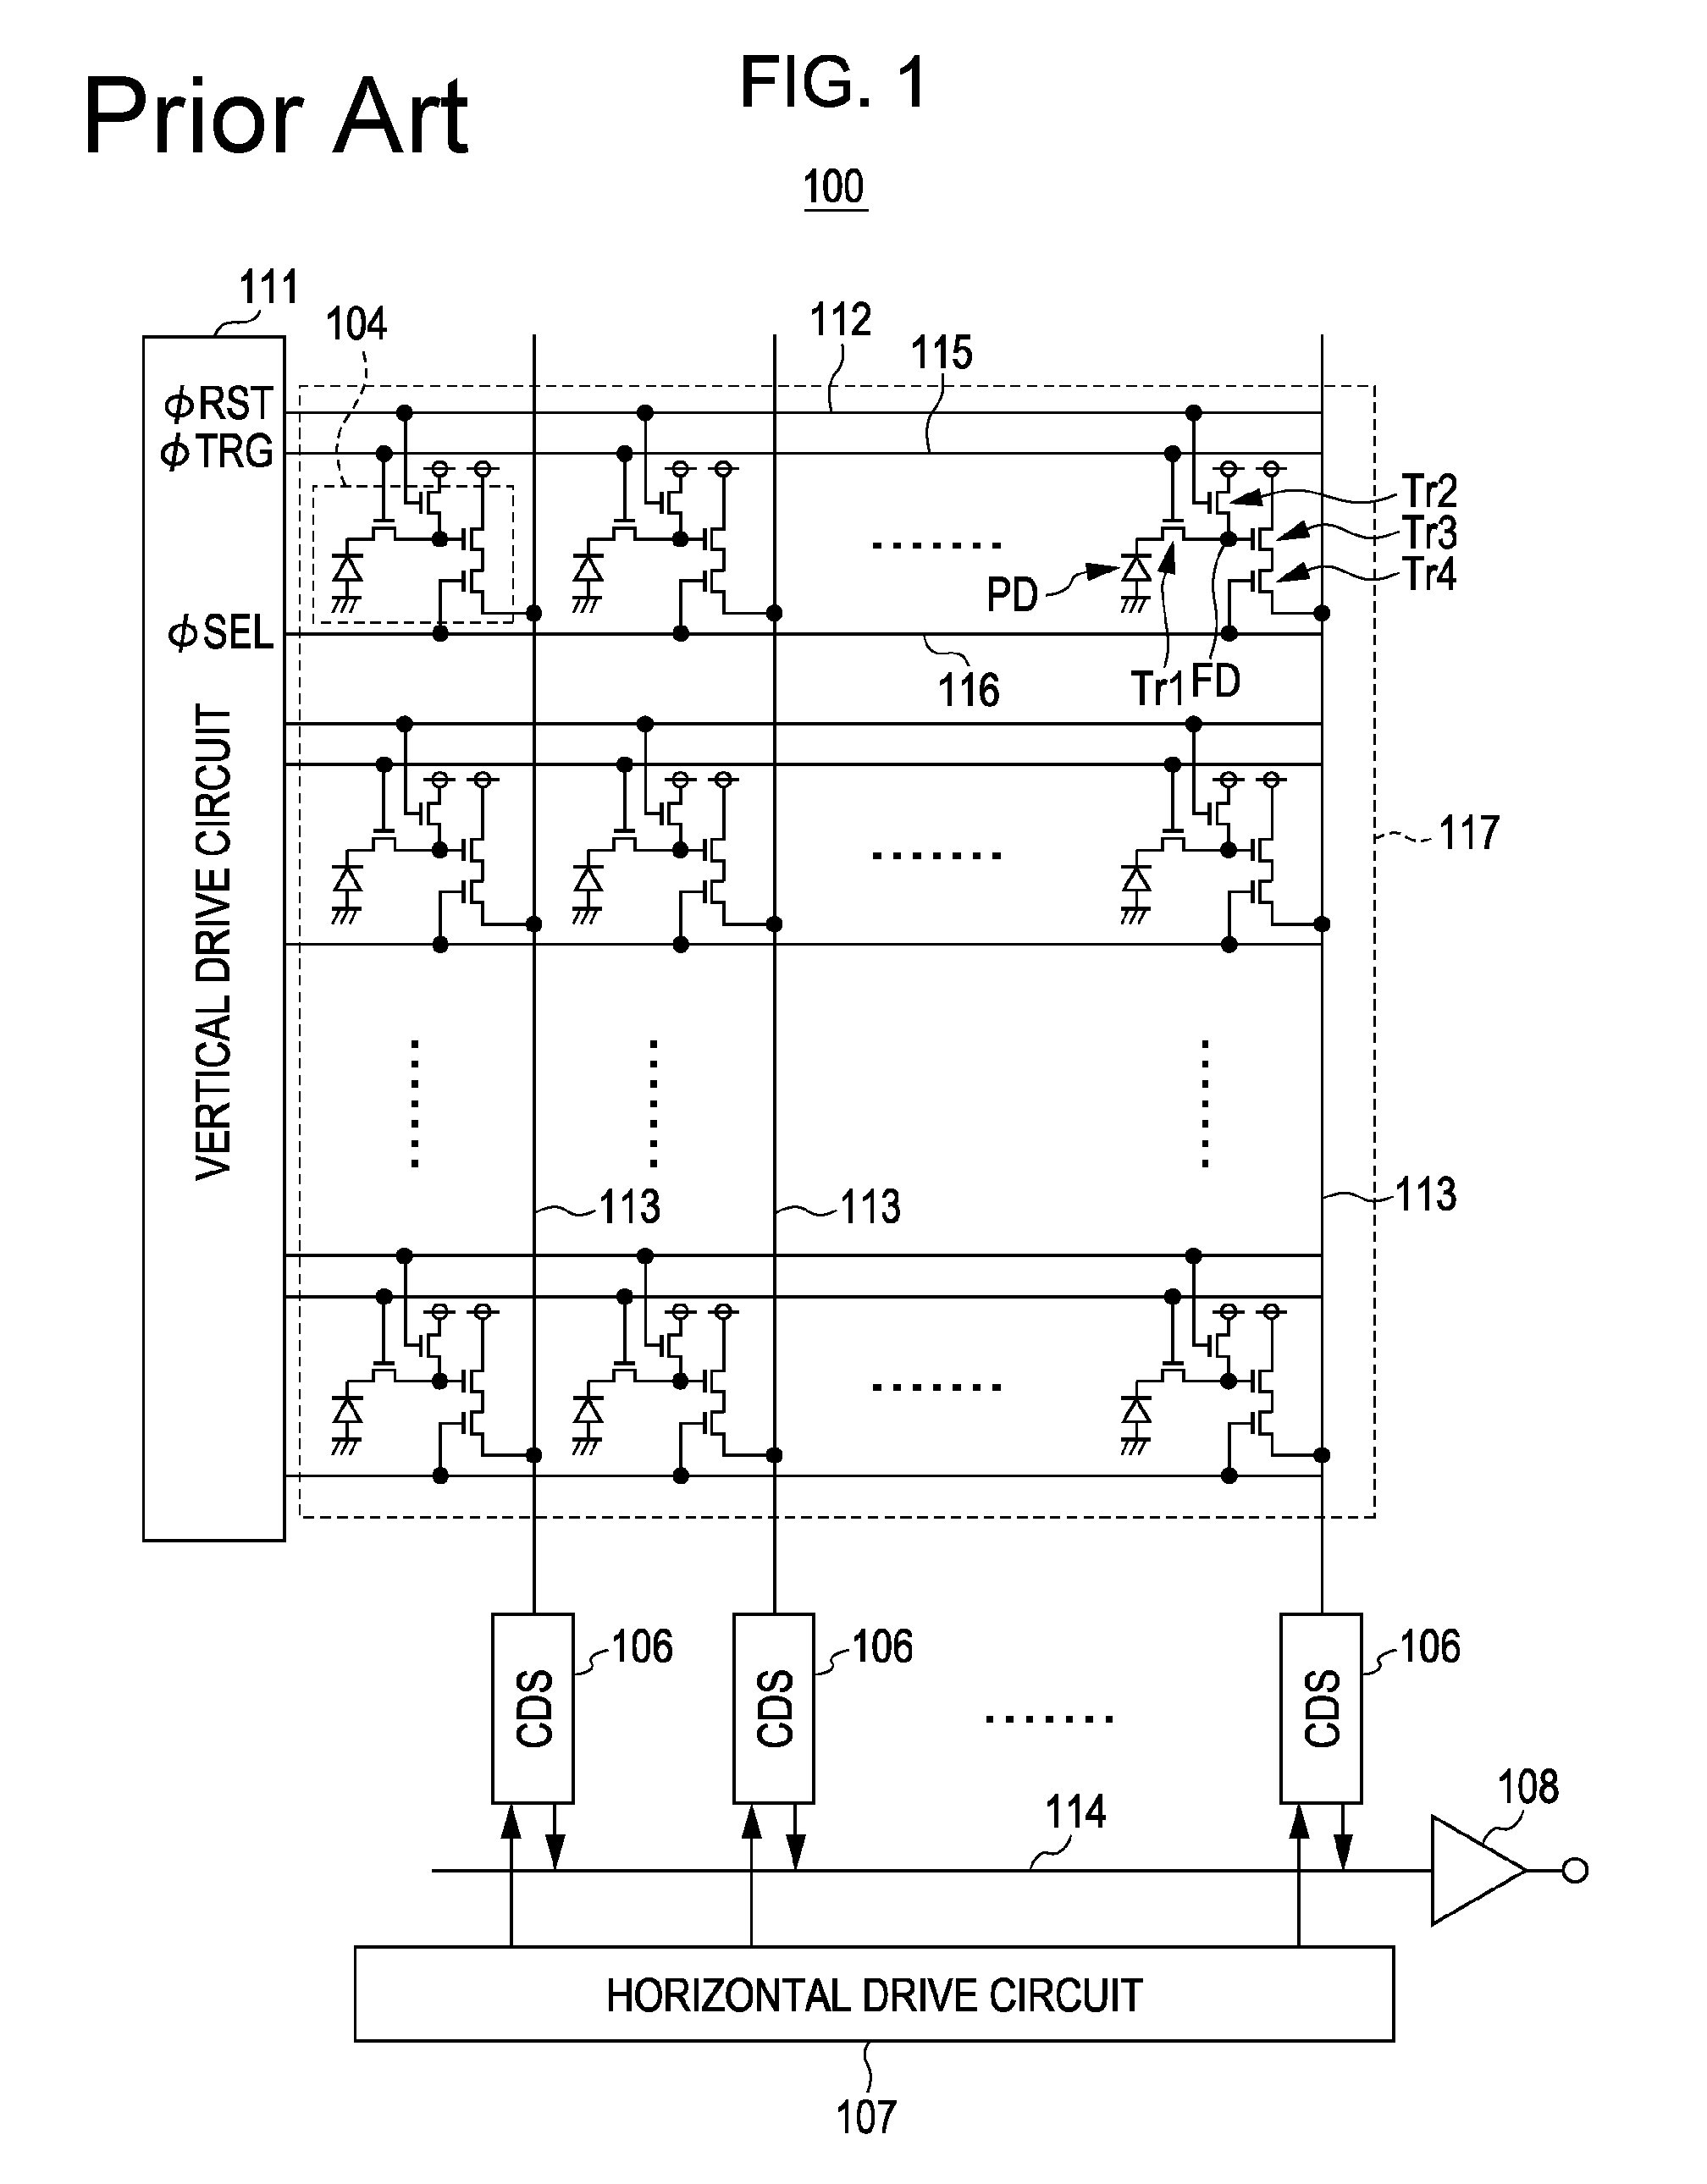 Solid-state imaging device with stacked sensor and processing chips